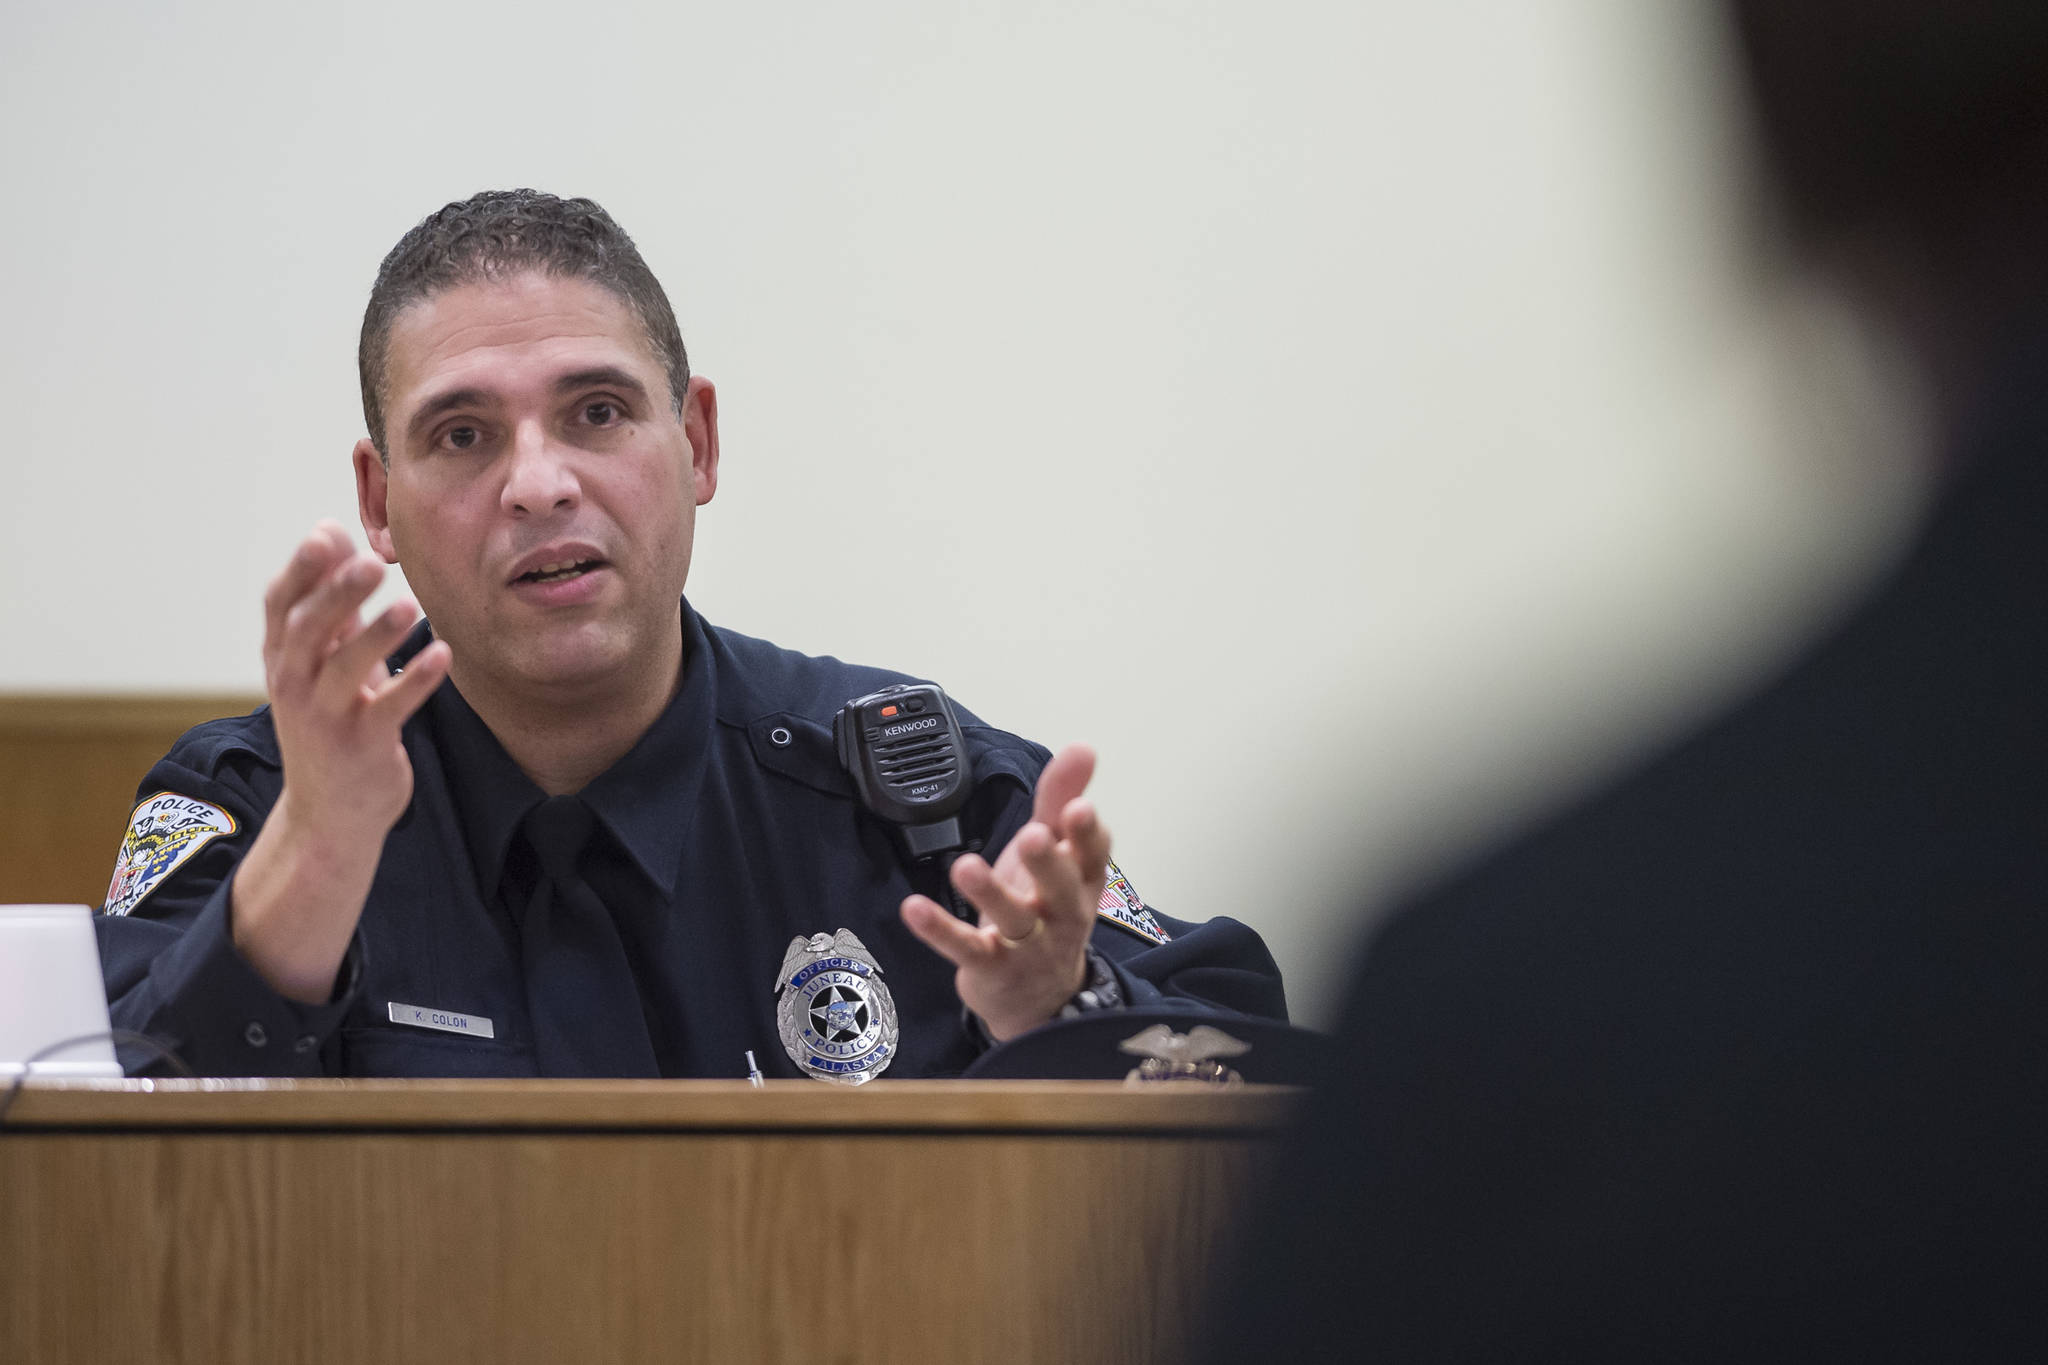 Juneau Police Department Officer Ken Colon is questioned by Assistant Municipal Attorney Emily Wright during the trial of Domanic Quick, 23, in Juneau District Court on Tuesday, Dec. 18, 2018. Quick is on trial on two counts of assault on a police officer, resisting arrest, disorderly conduct and criminal mischief. (Michael Penn | Juneau Empire)